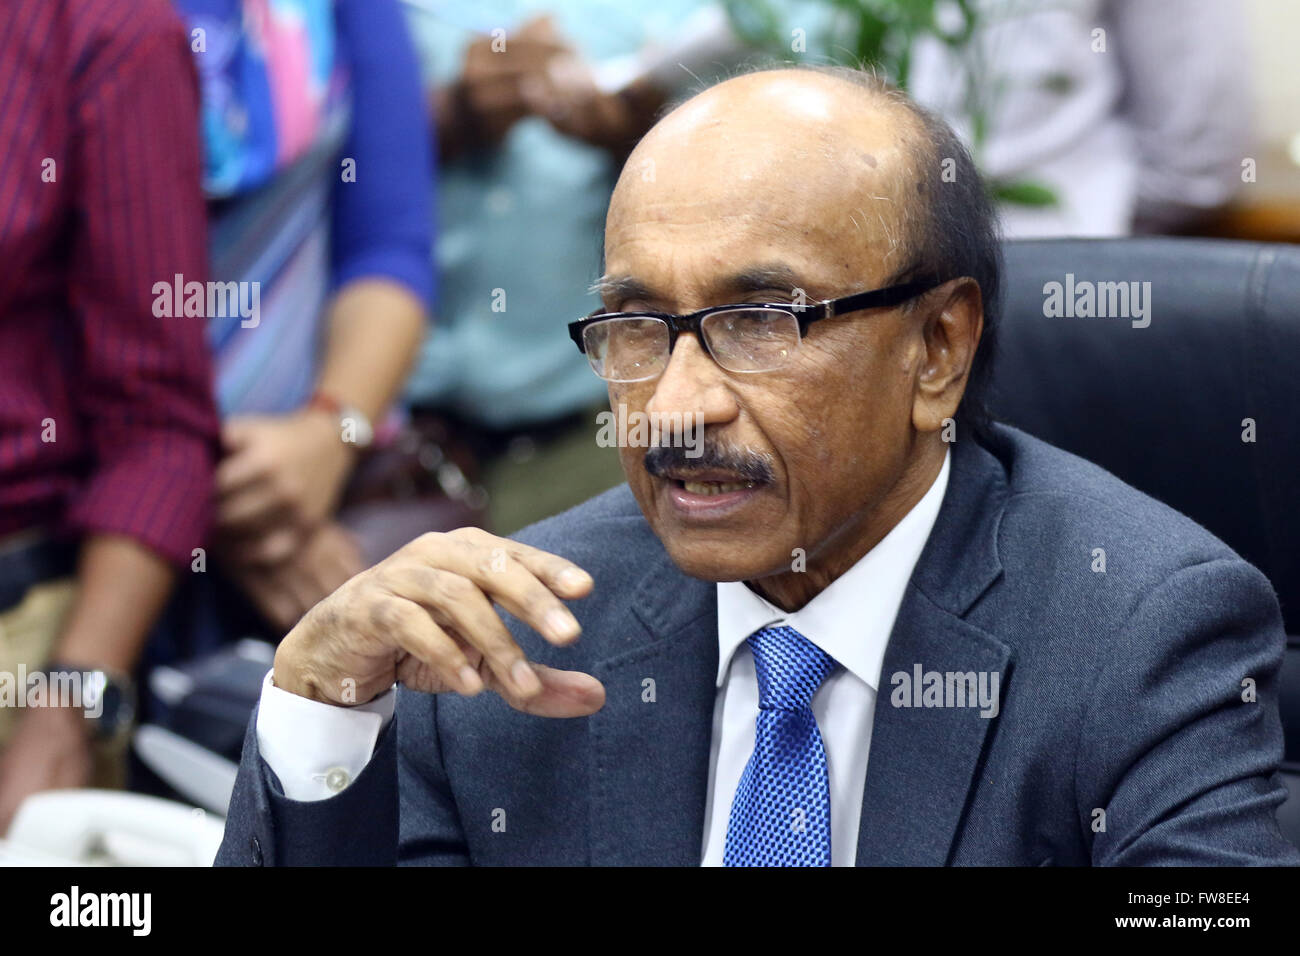 Dhaka 20 March 2016. The newly appointed governor of Bangladesh Bank Fazle Kabir is talking with the press on his first day at his office at the central bank of Bangladesh. The government on March 16 appointed him as the new governor of Bangladesh Bank after the central bank’s $101 million cyber heist. Stock Photo